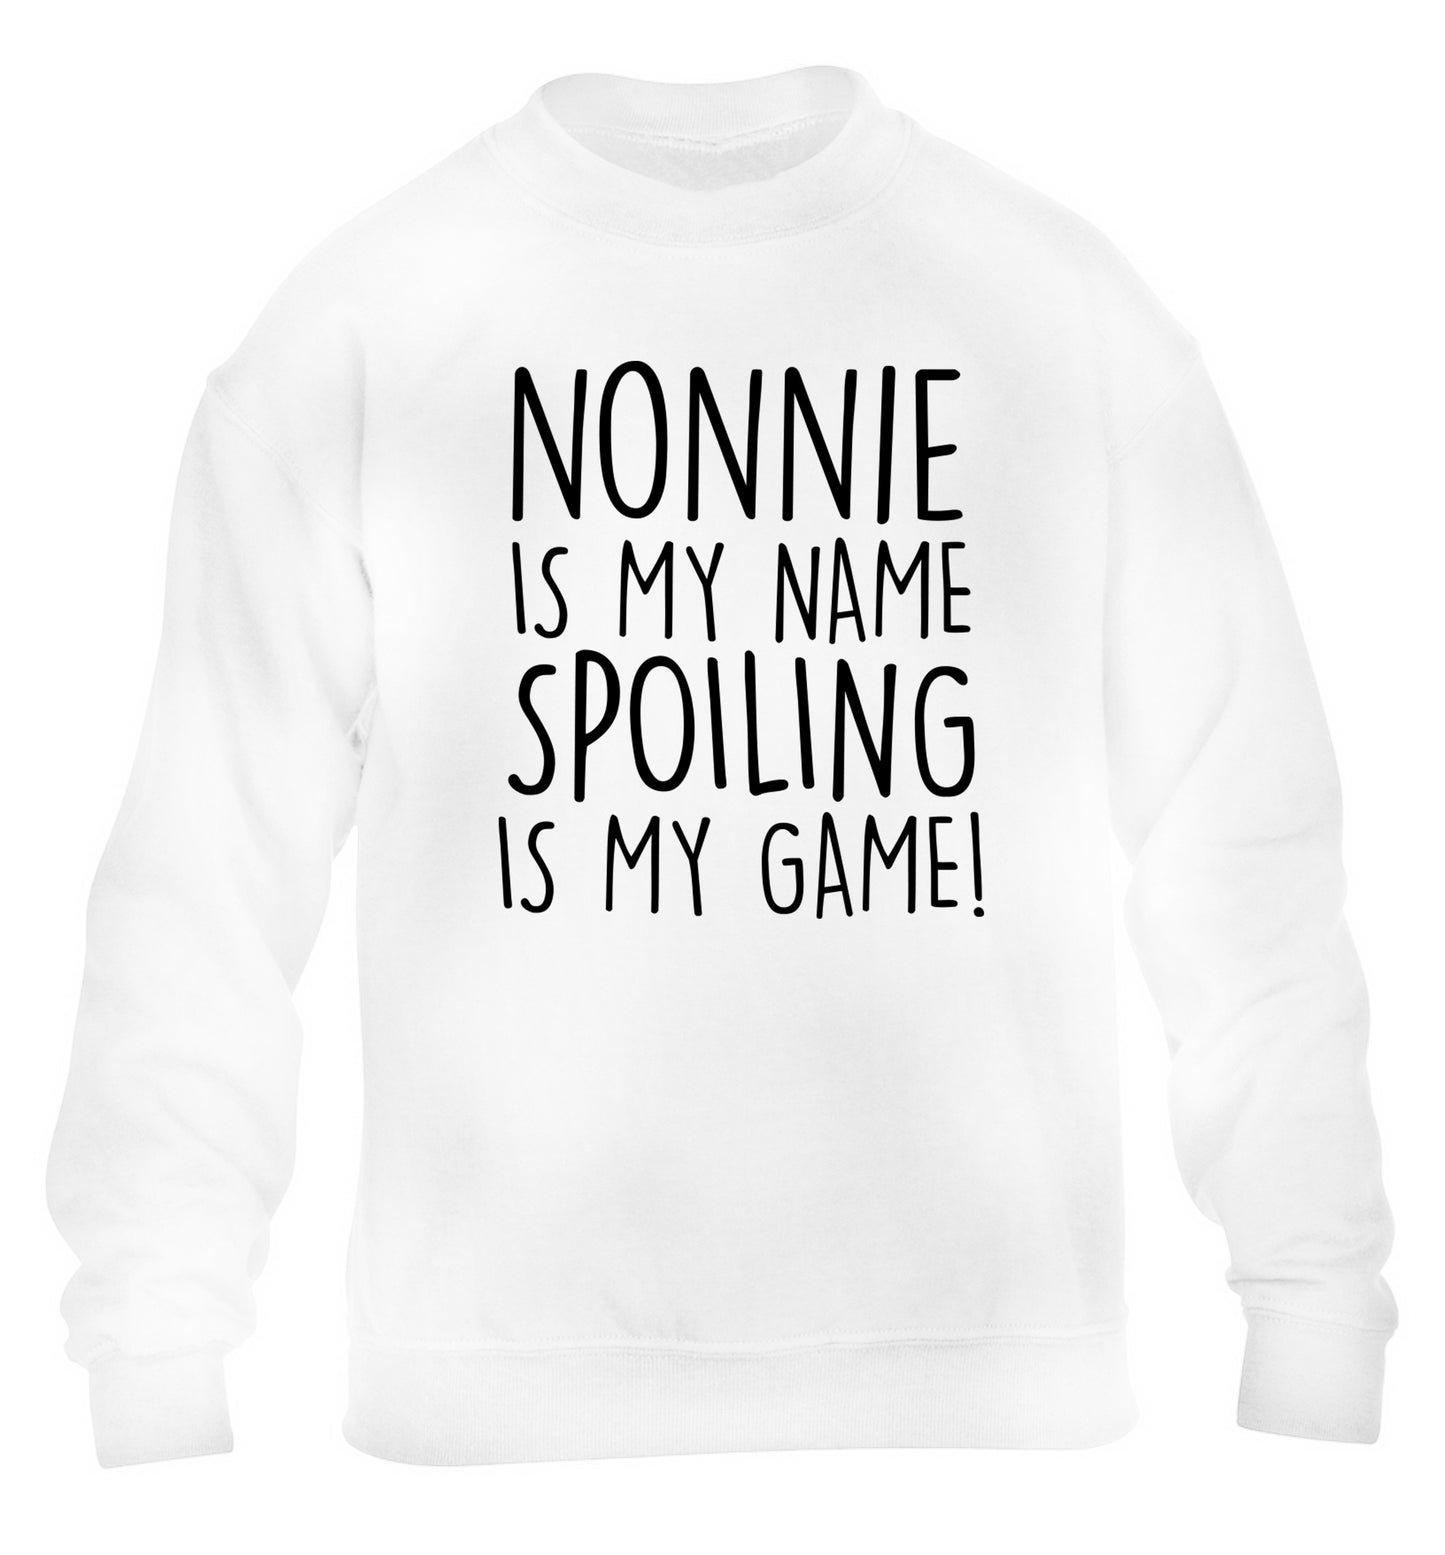 Nonnie is my name, spoiling is my game children's white sweater 12-14 Years